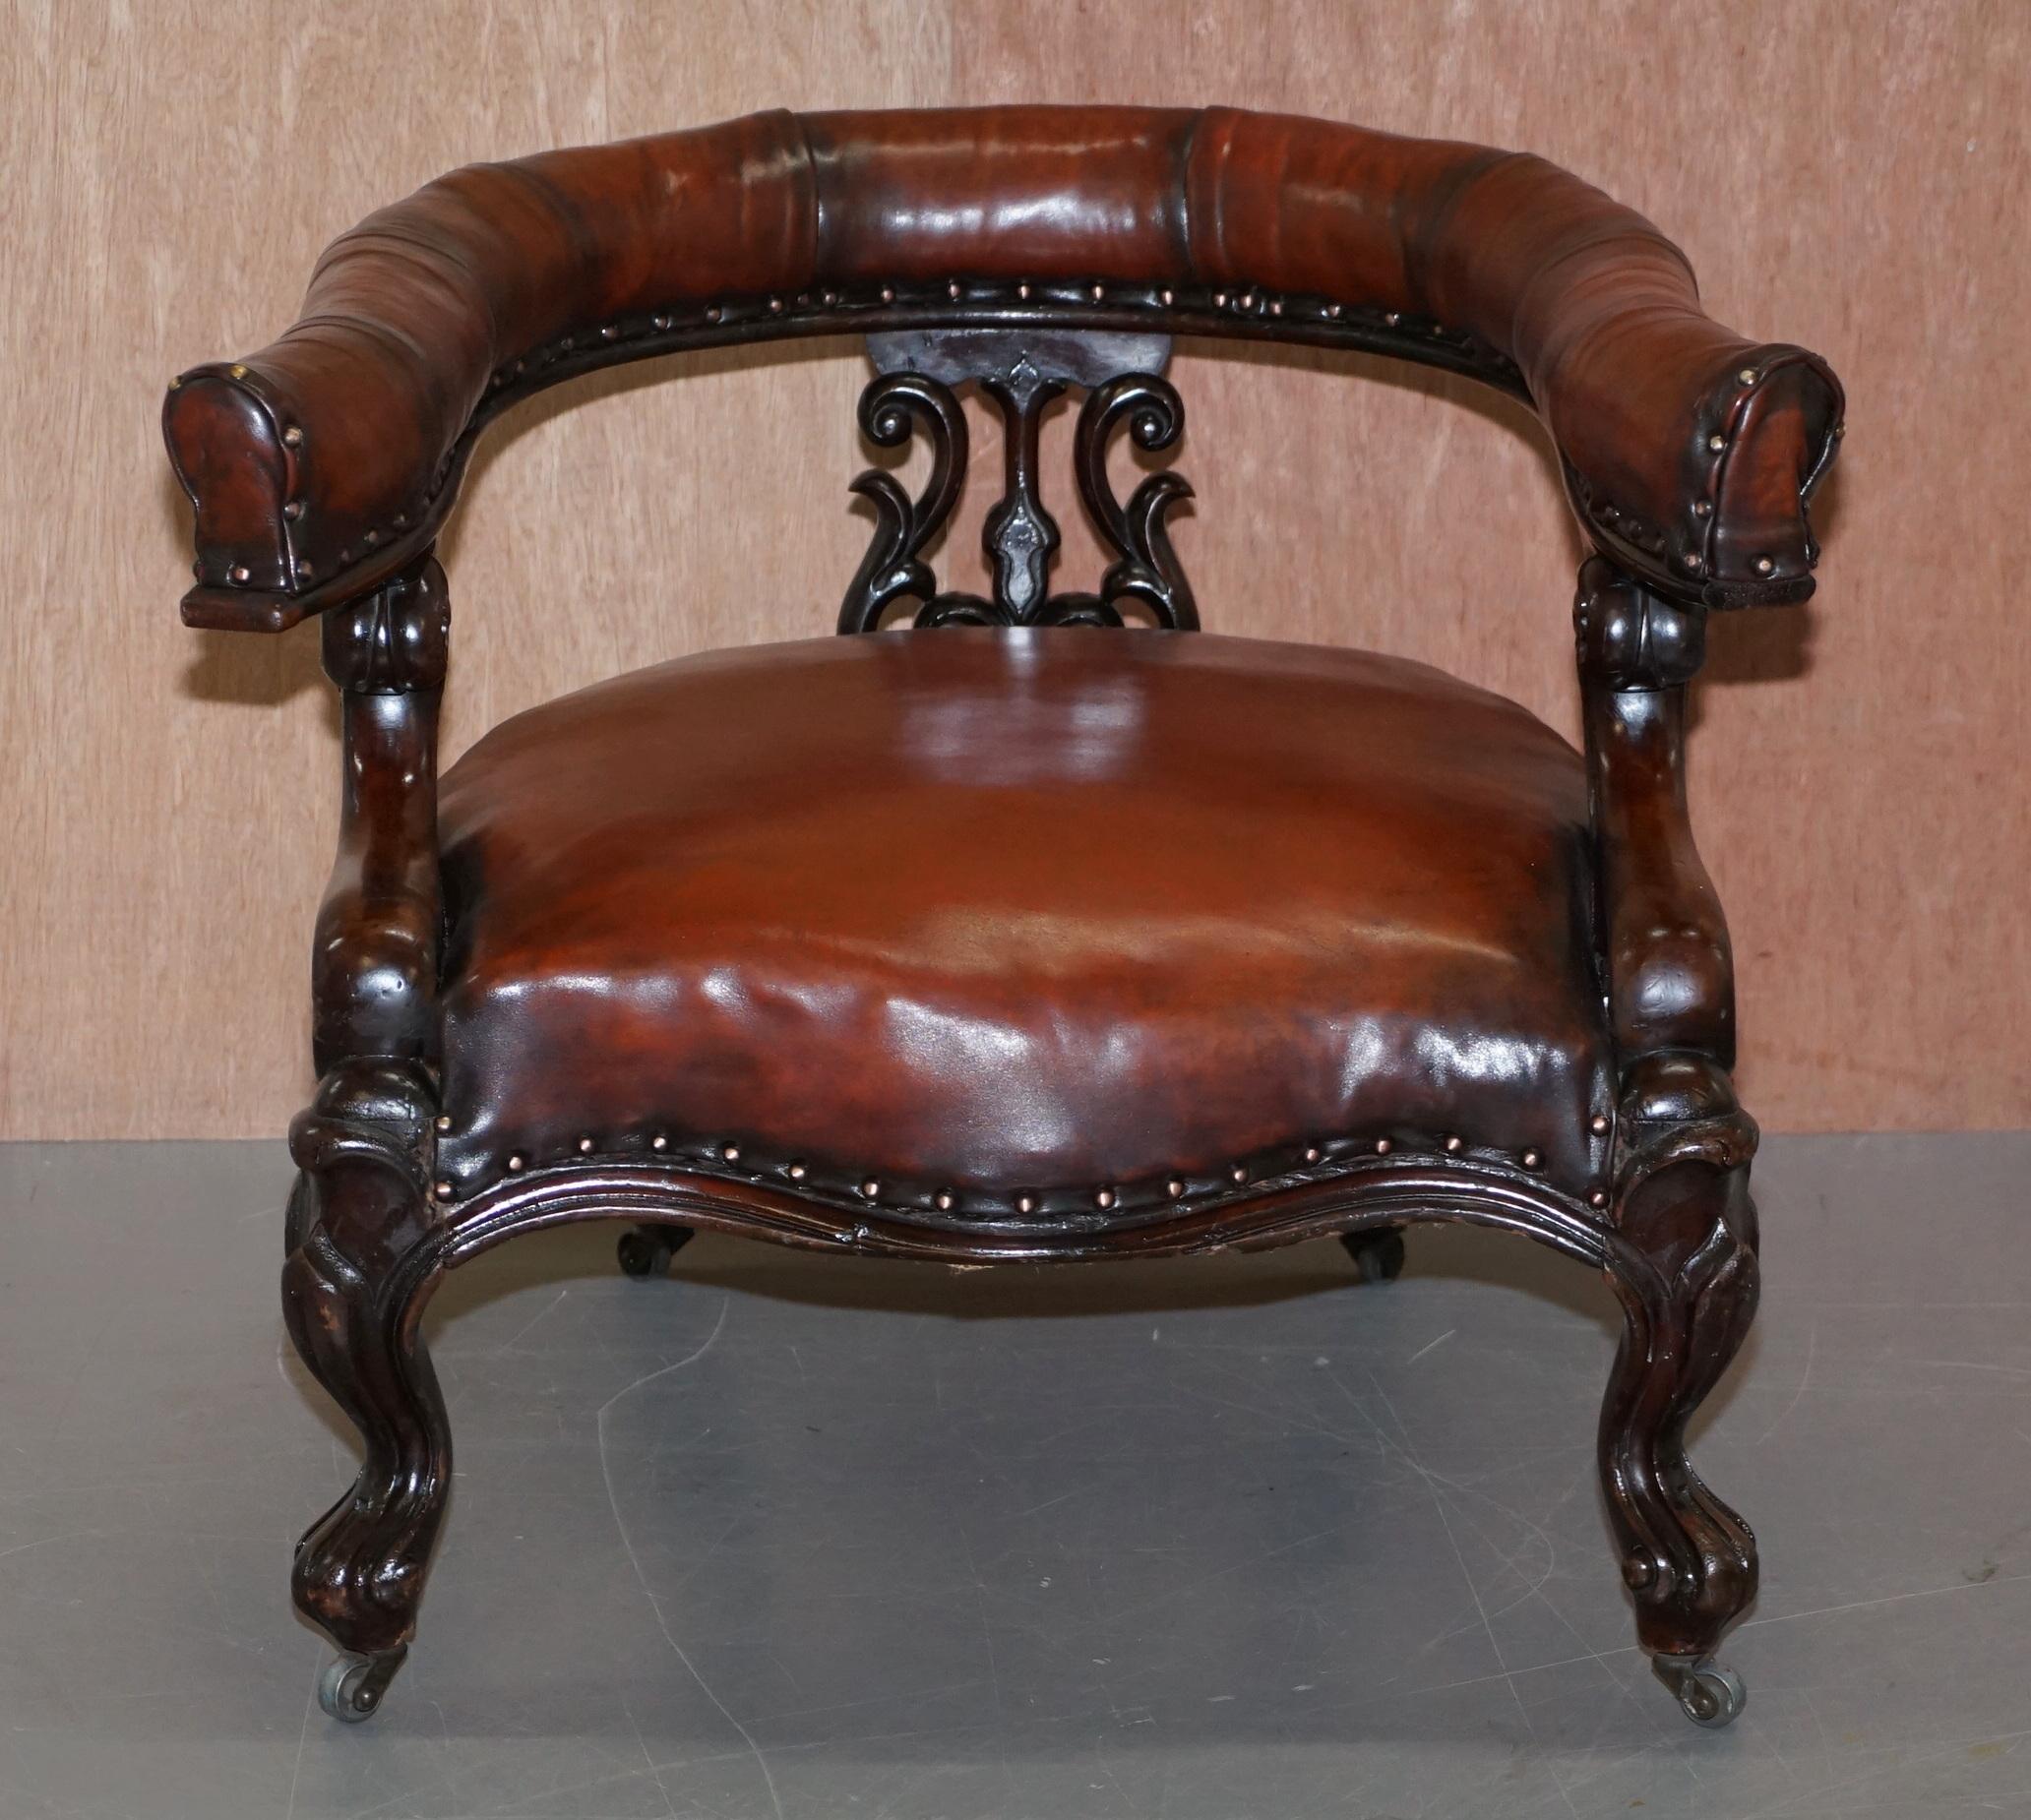 We are delighted to offer for sale this stunning fully restored cigar brown hand dyed leather Regency show framed armchair

A very good looking and nicely refurbished piece. This is an original Regency circa 1810 armchair, the seat platform is all